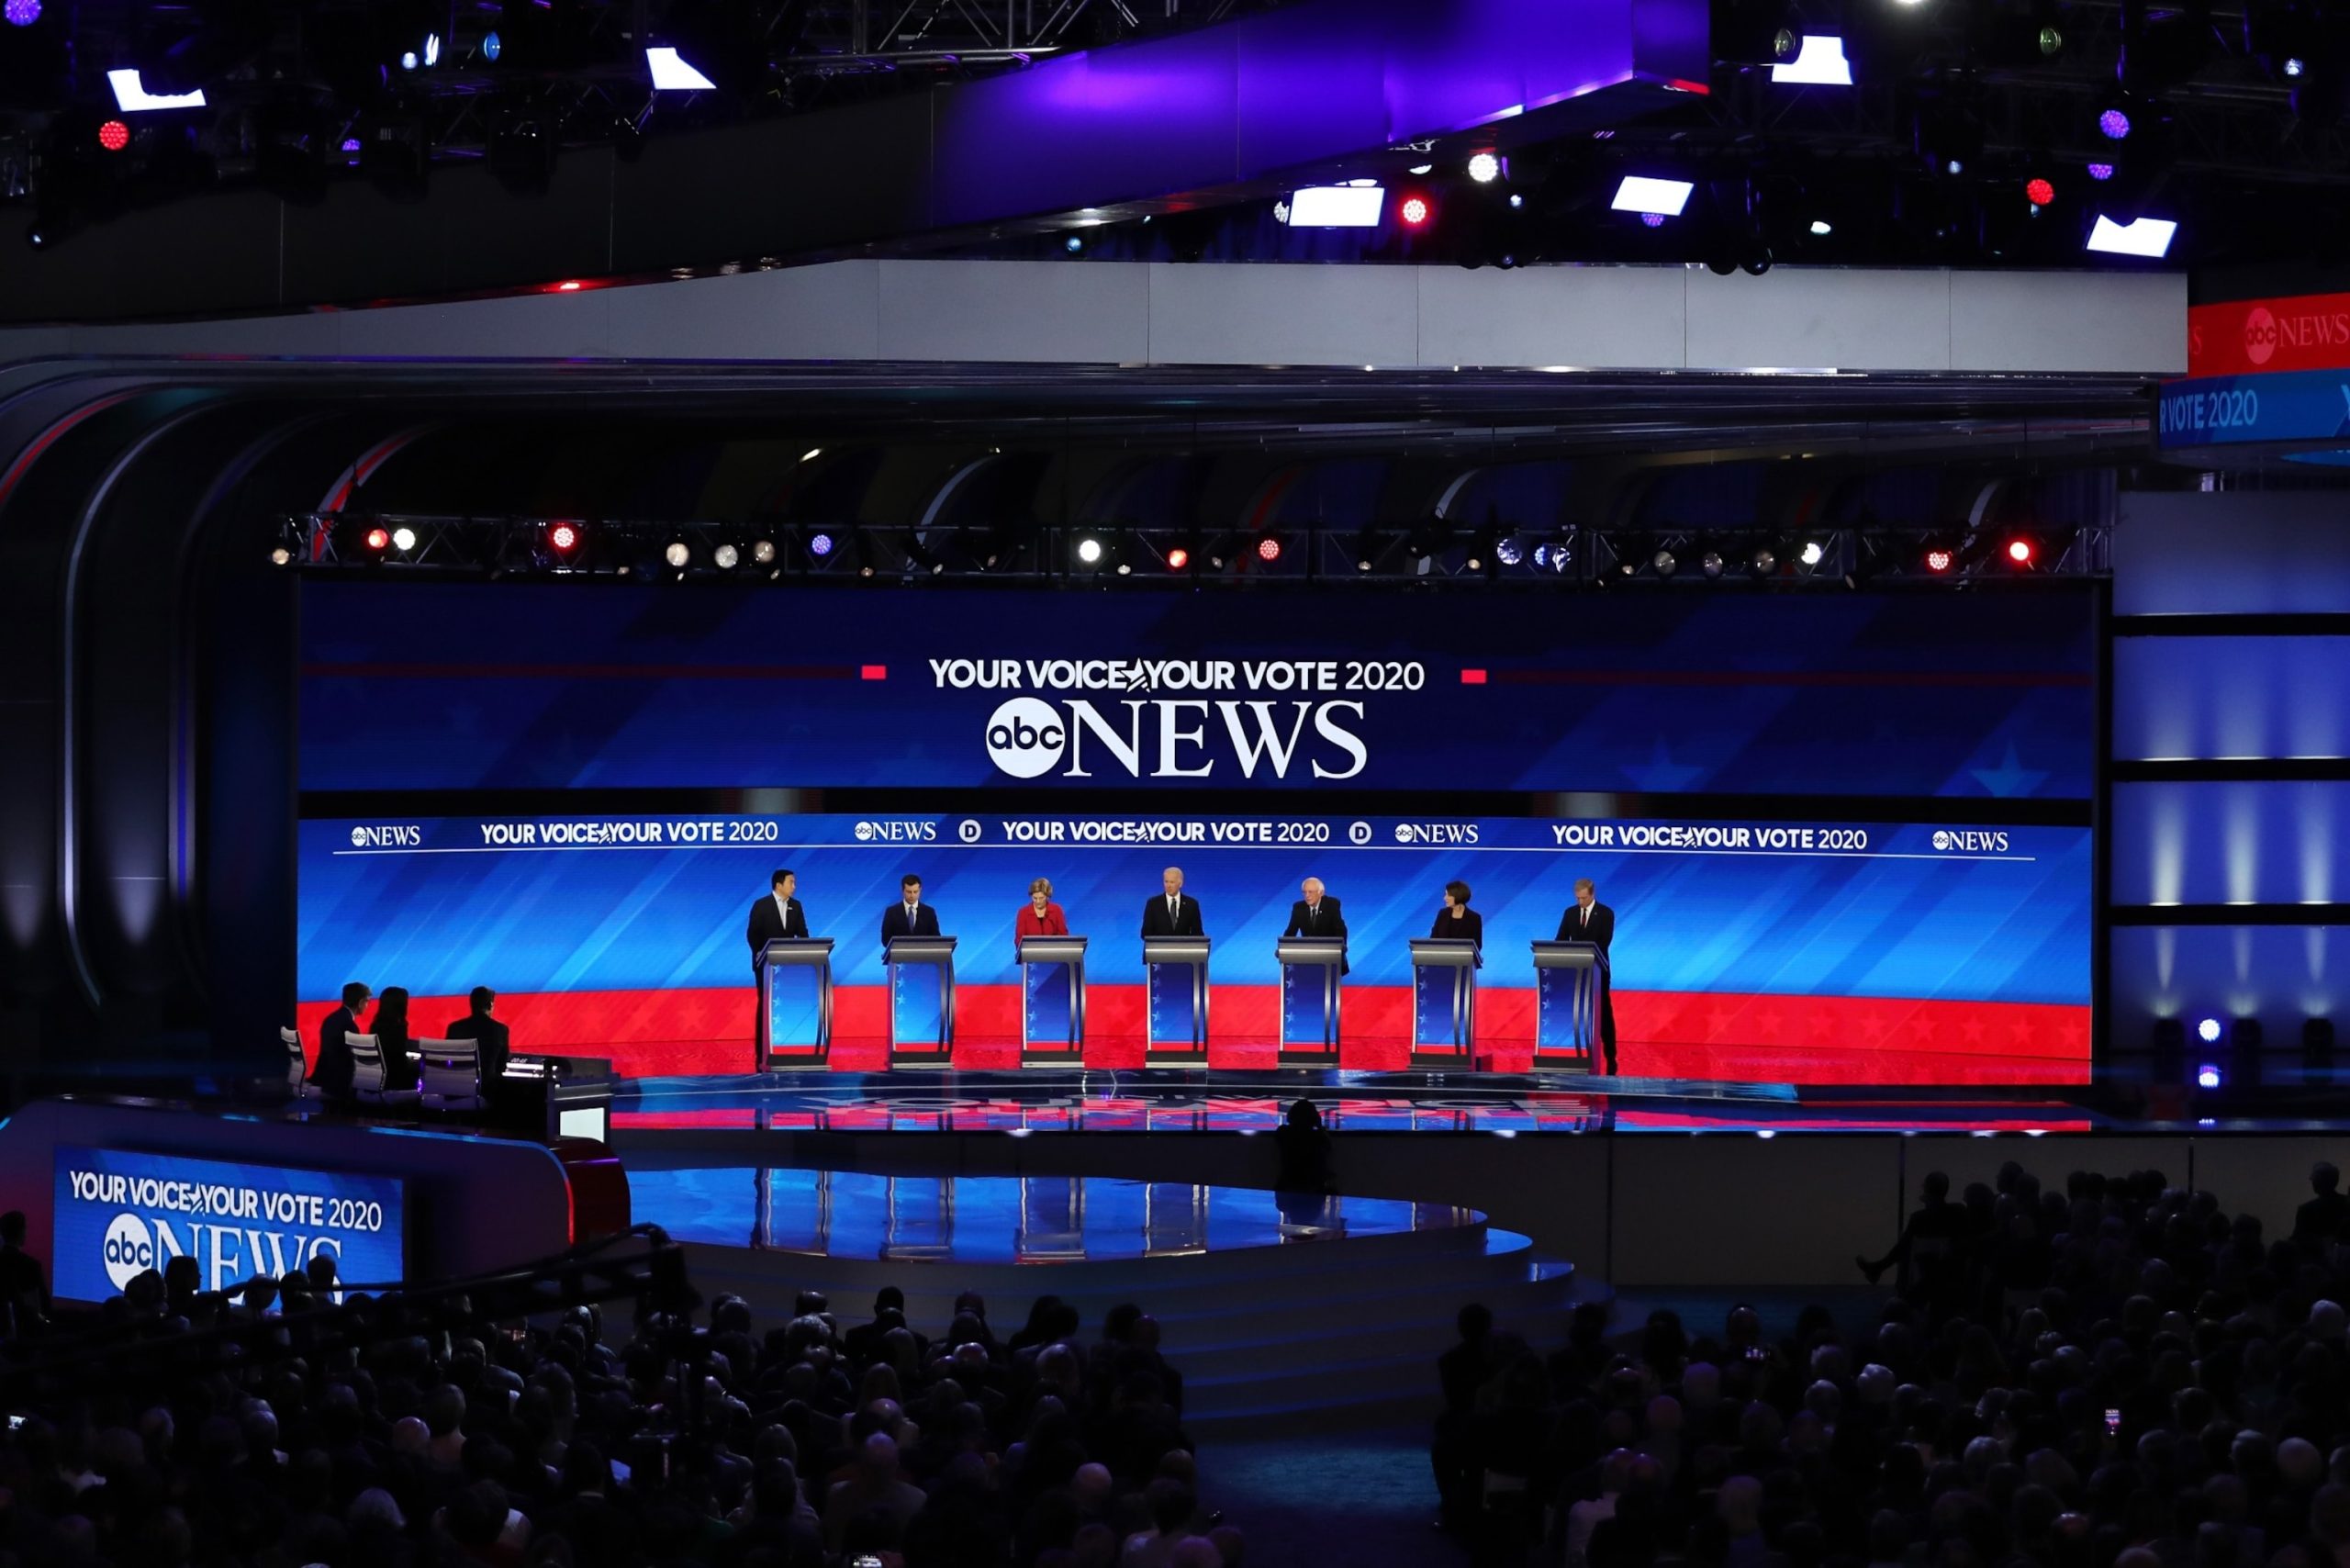 ABC News to hold Republican presidential debate ahead of New Hampshire primary